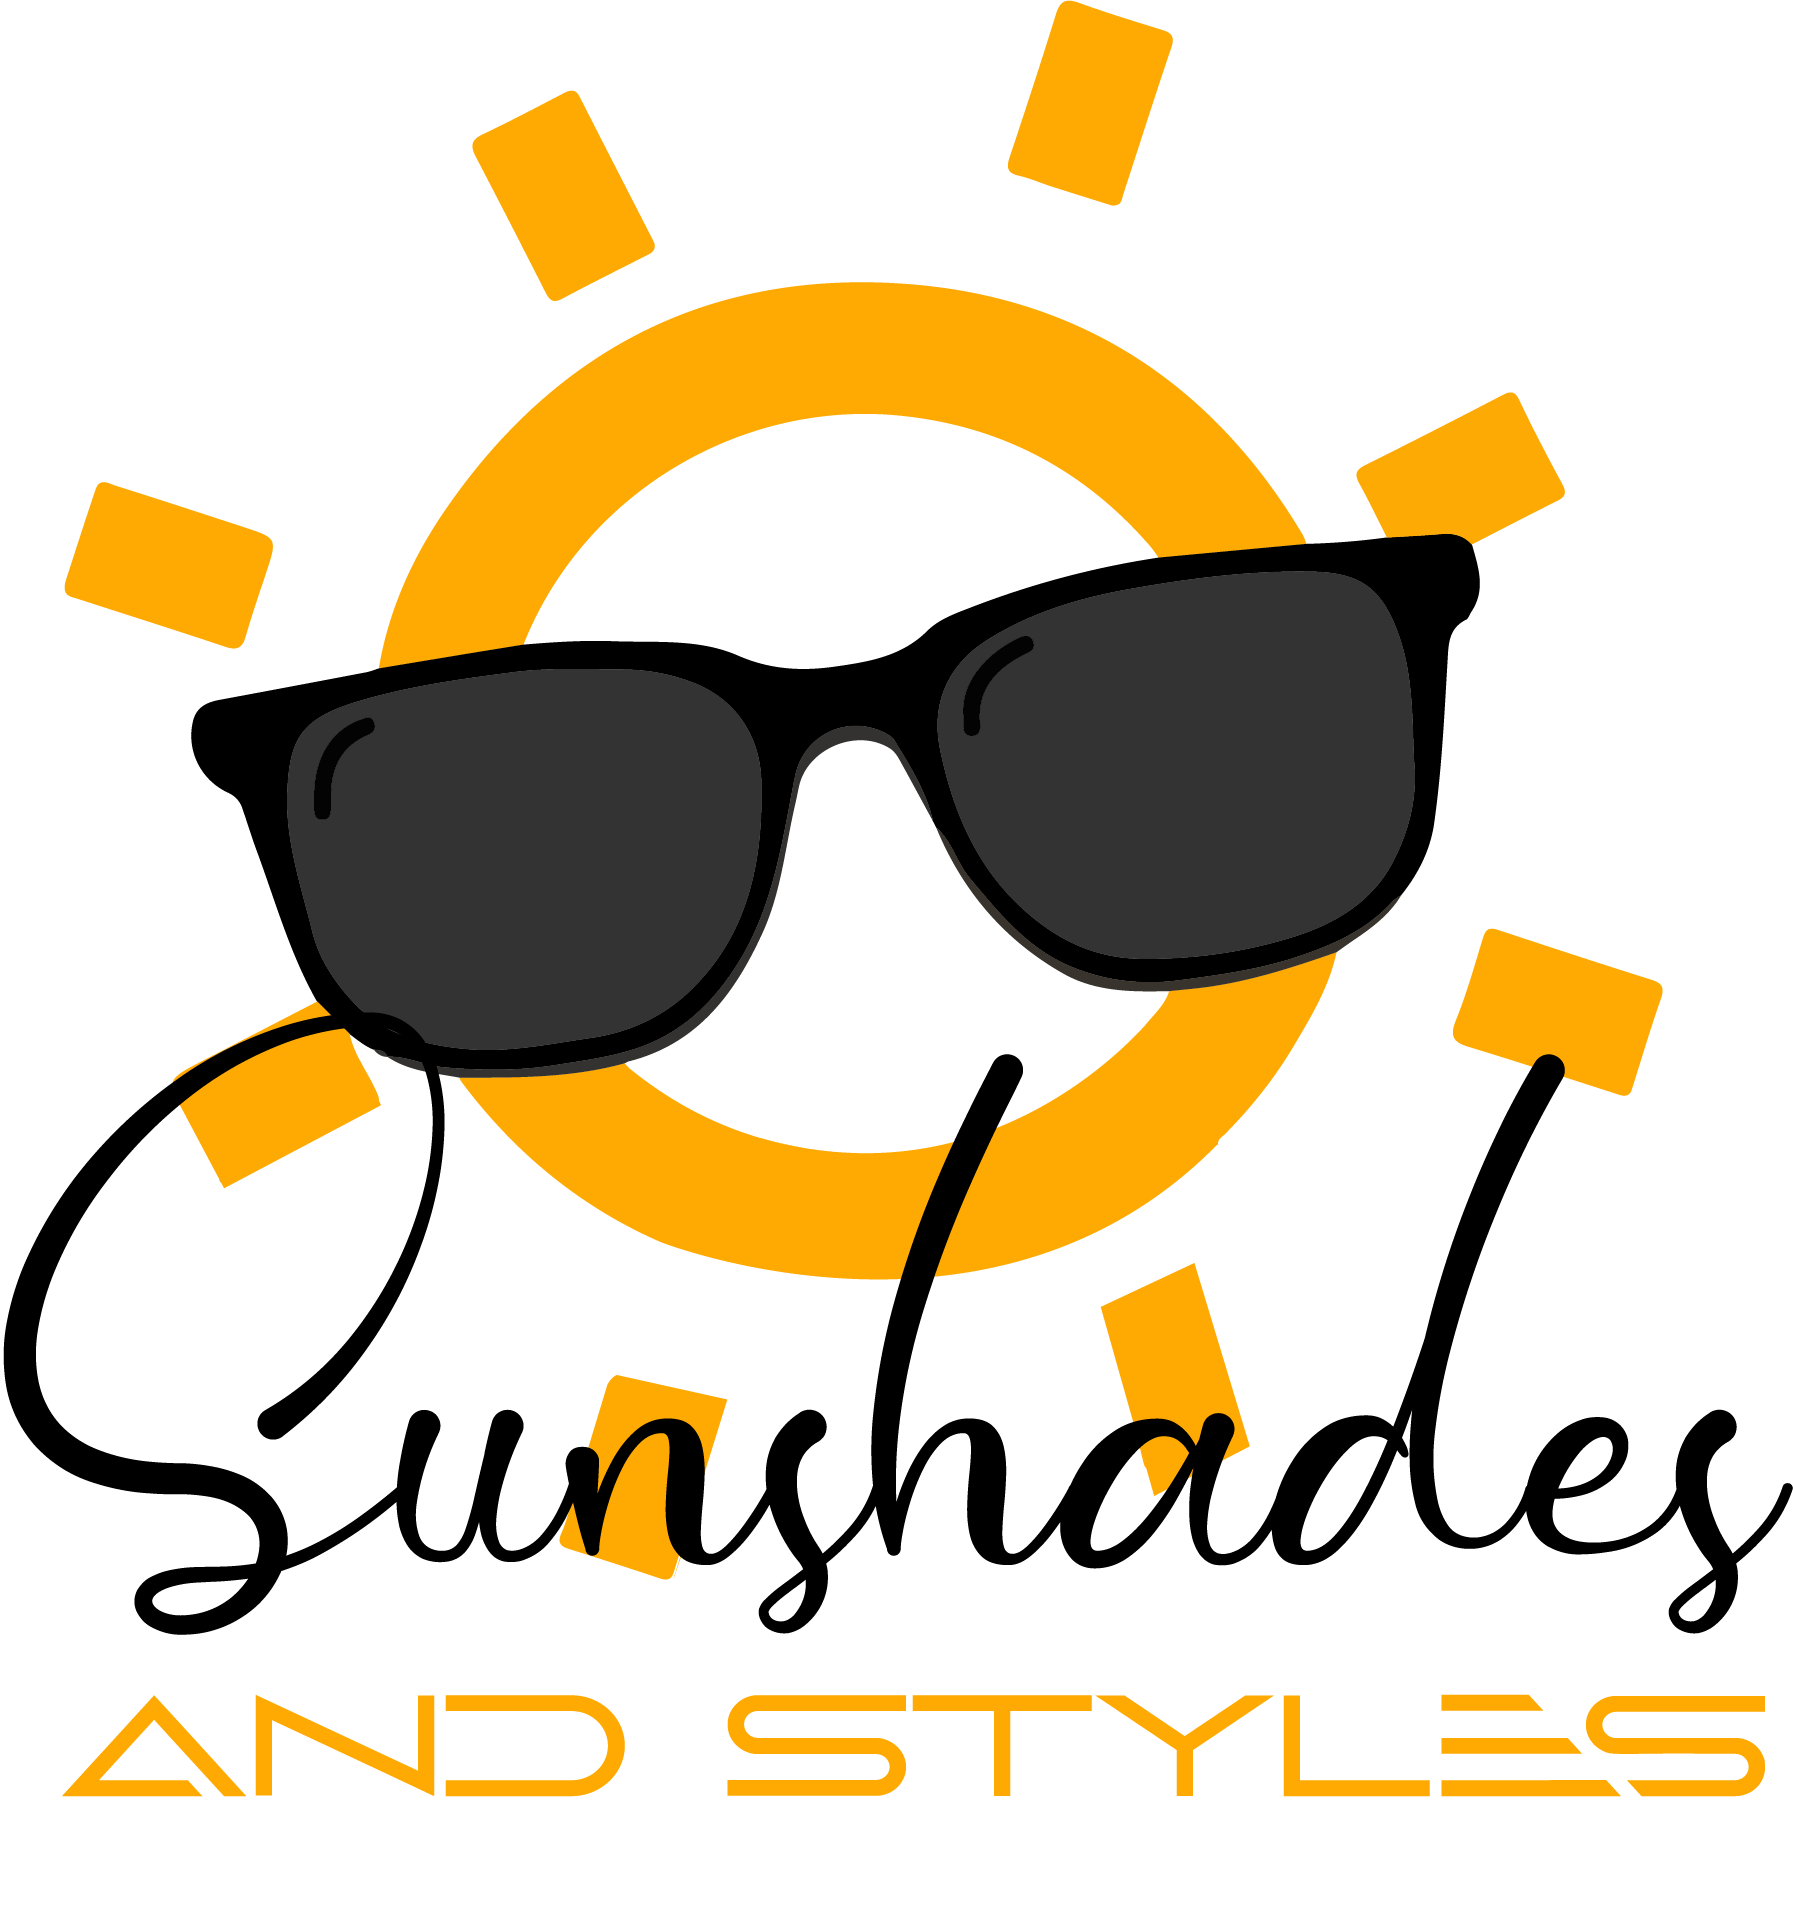 SUNSHADES AND STYLES